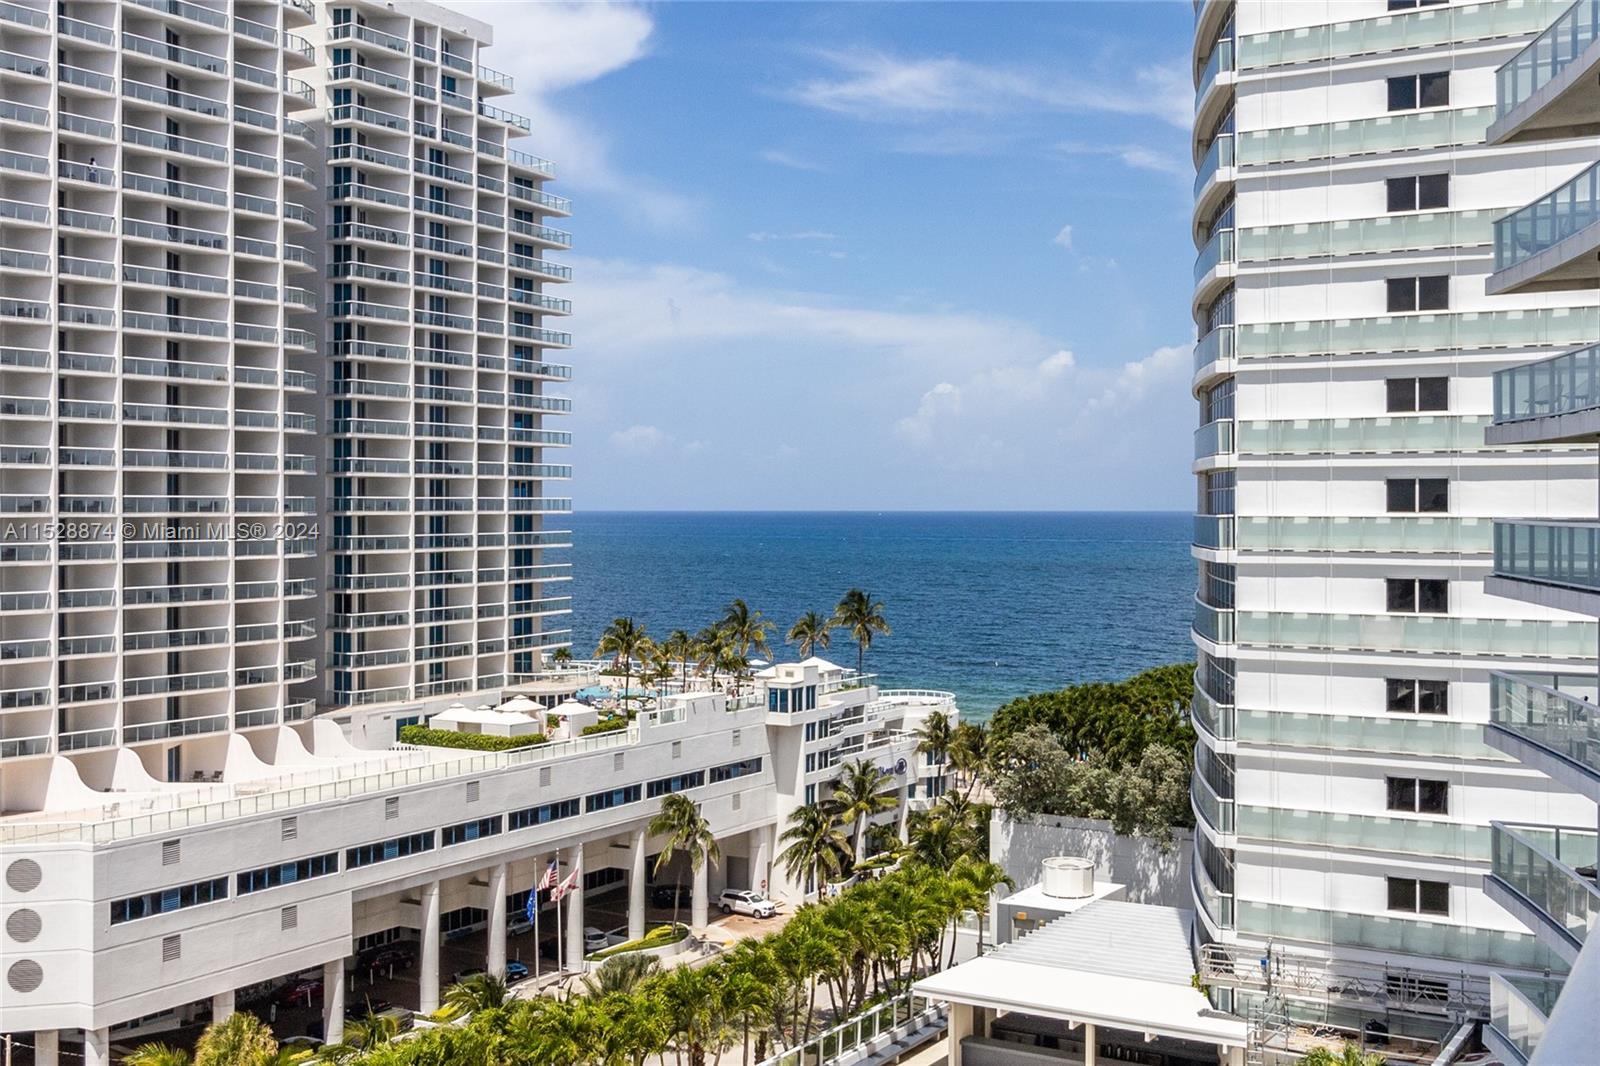 Photo of 3101 Bayshore Dr #1104 in Fort Lauderdale, FL